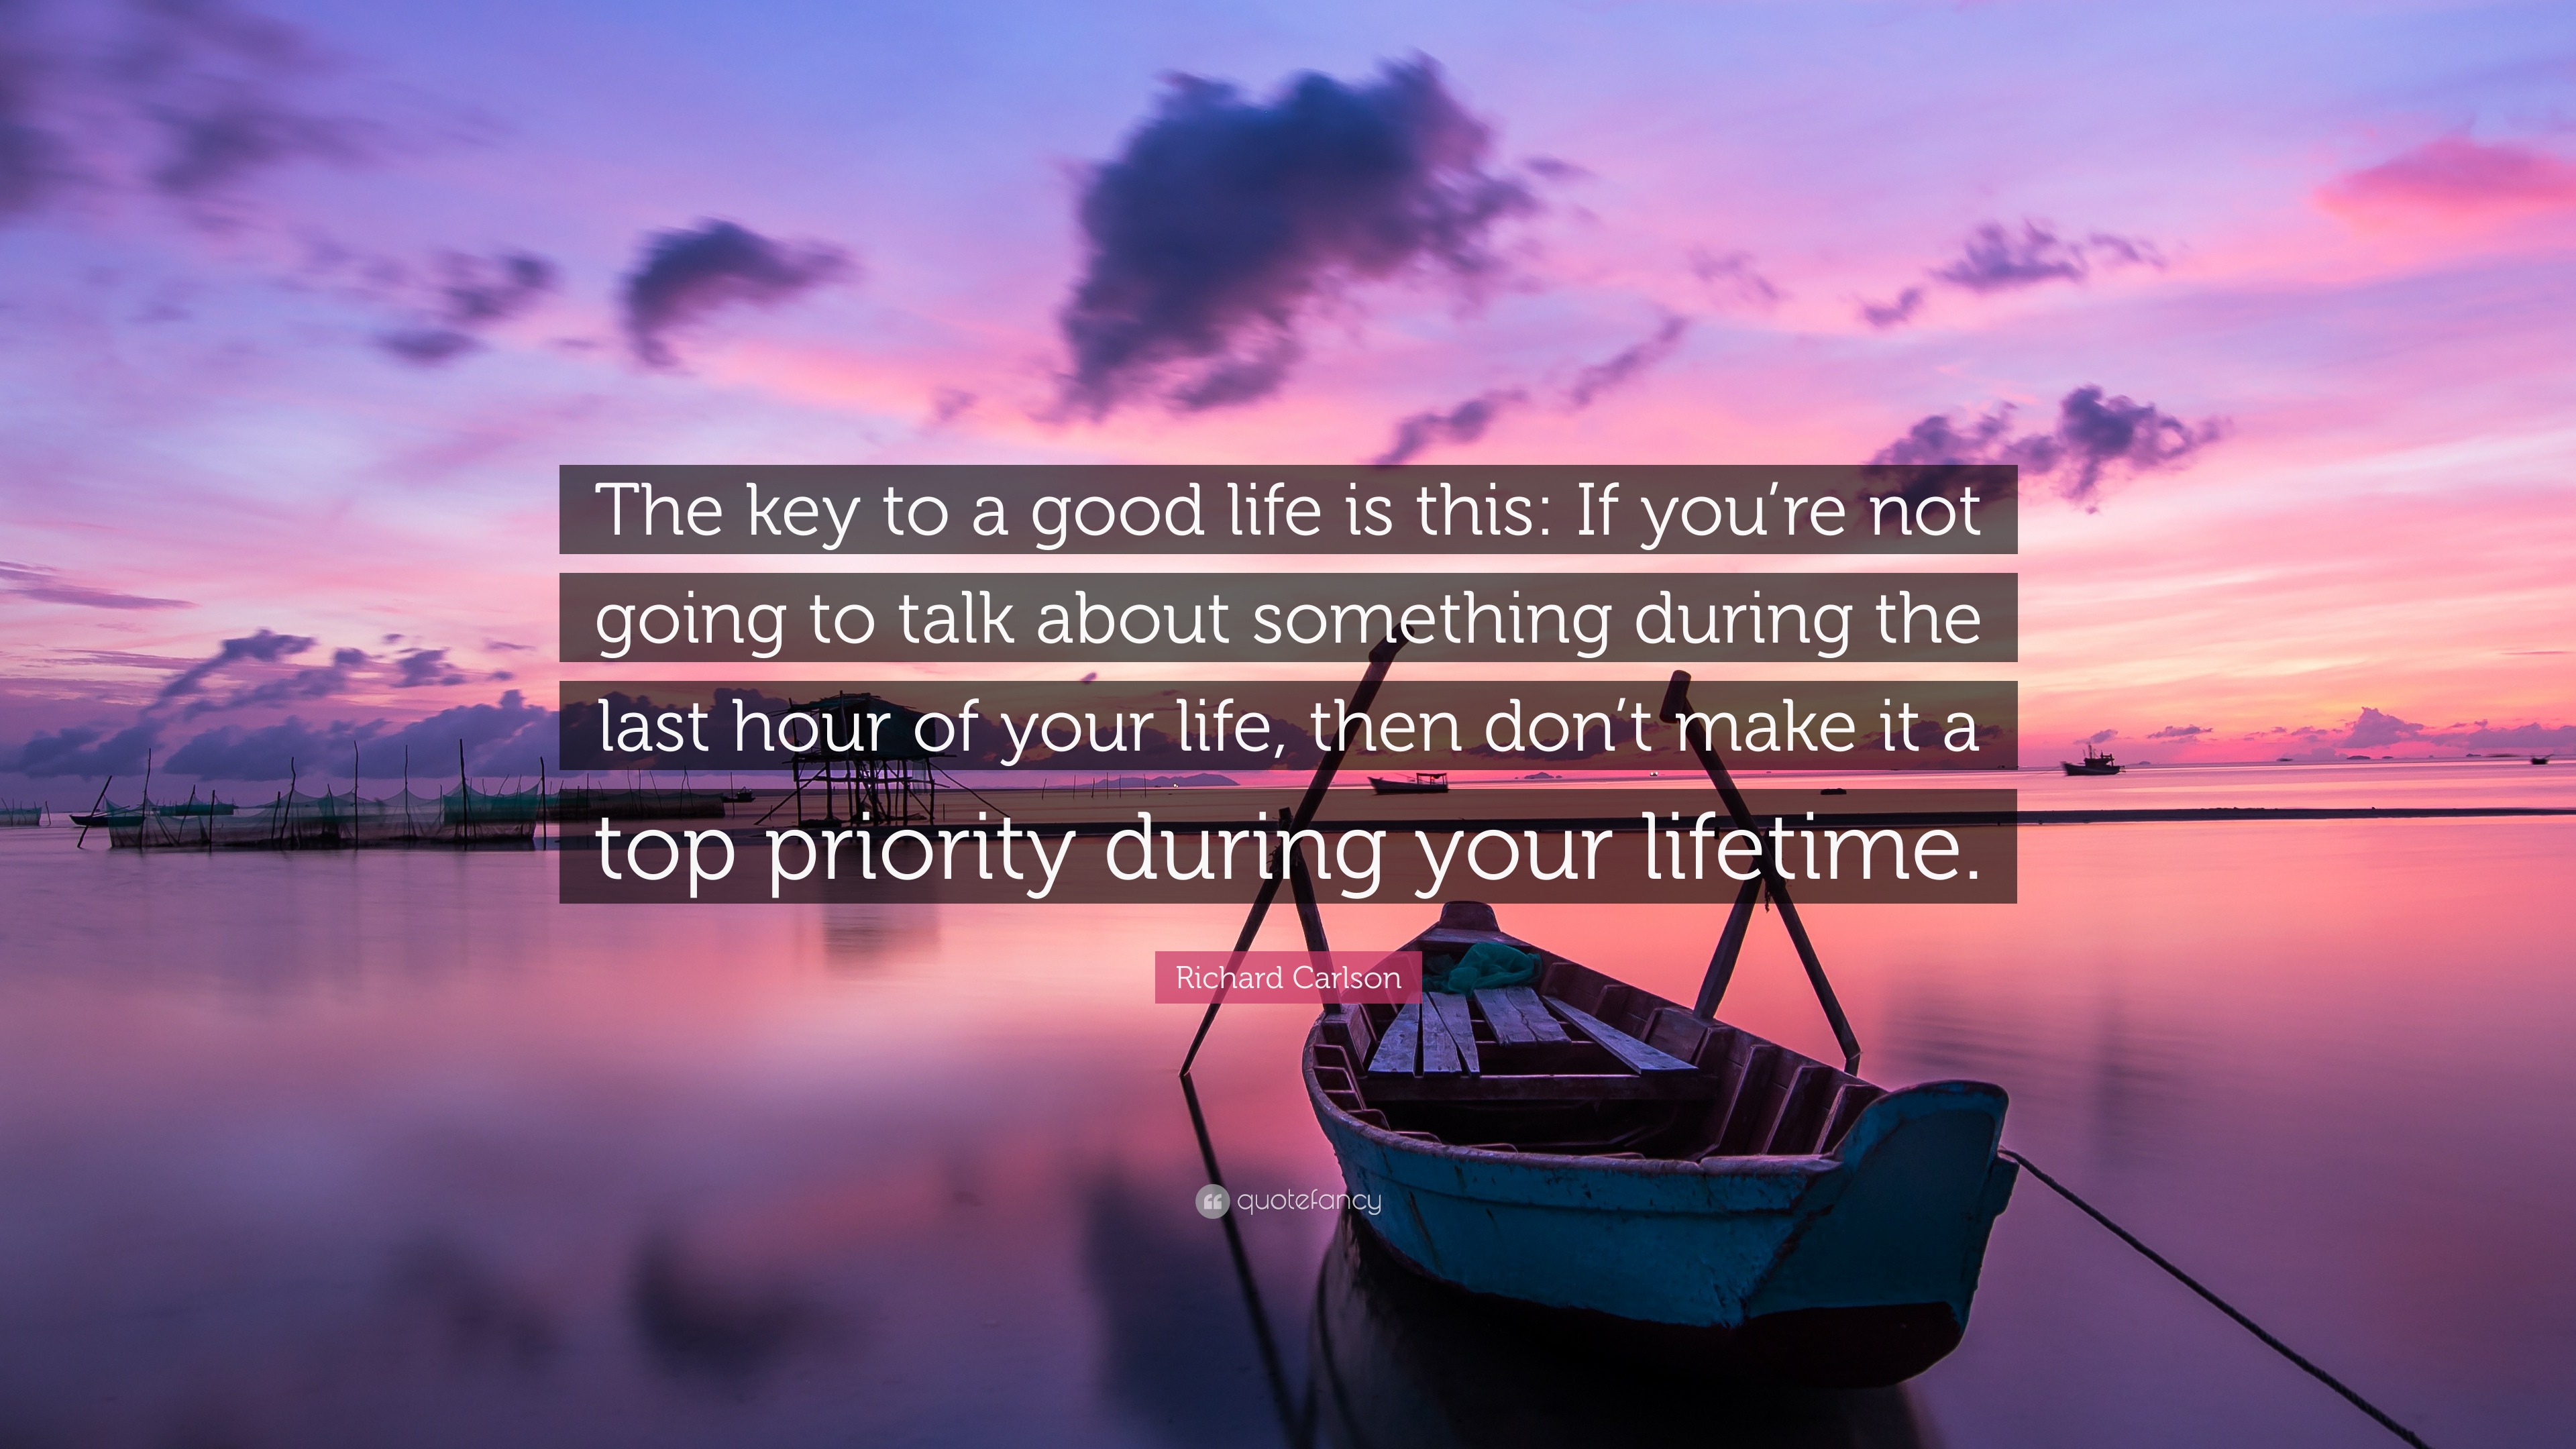 Richard Carlson Quote: “The key to a good life is this: If you’re not ...